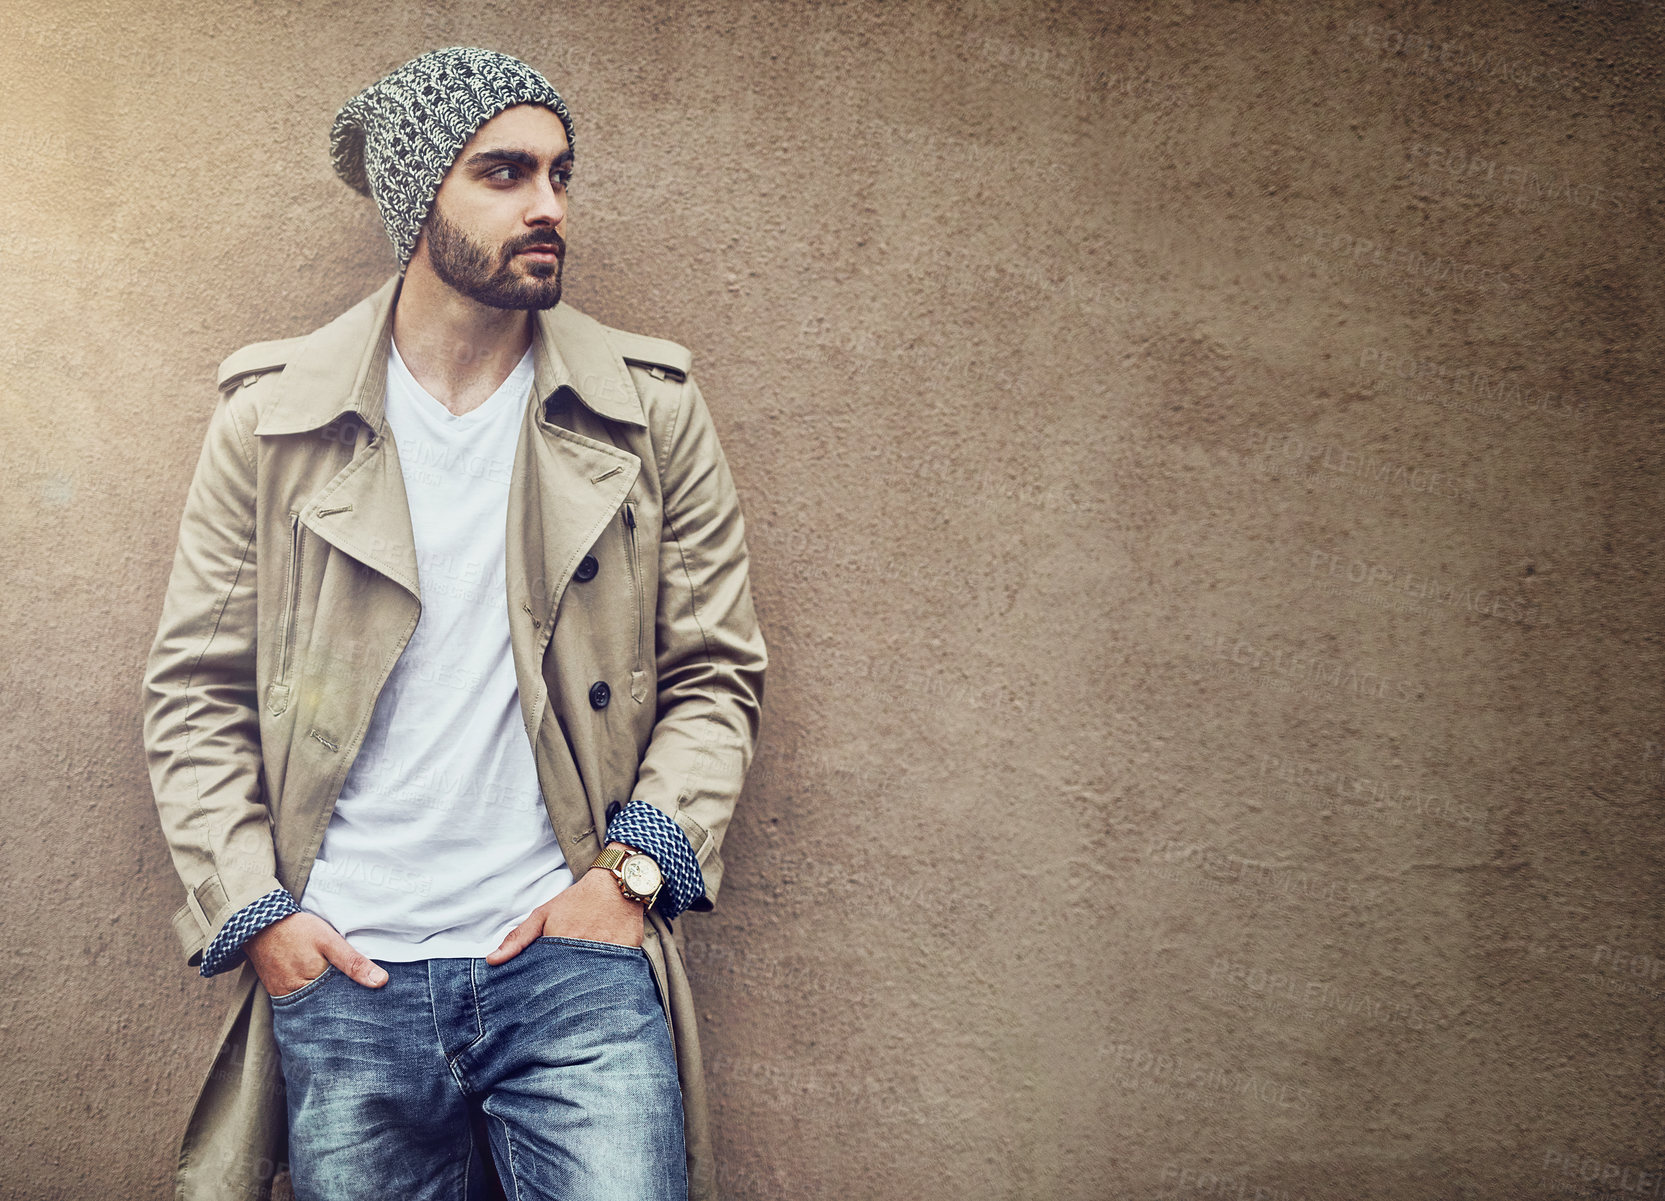 Buy stock photo Shot of a fashionable young man wearing urban wear and posing against a brown wall